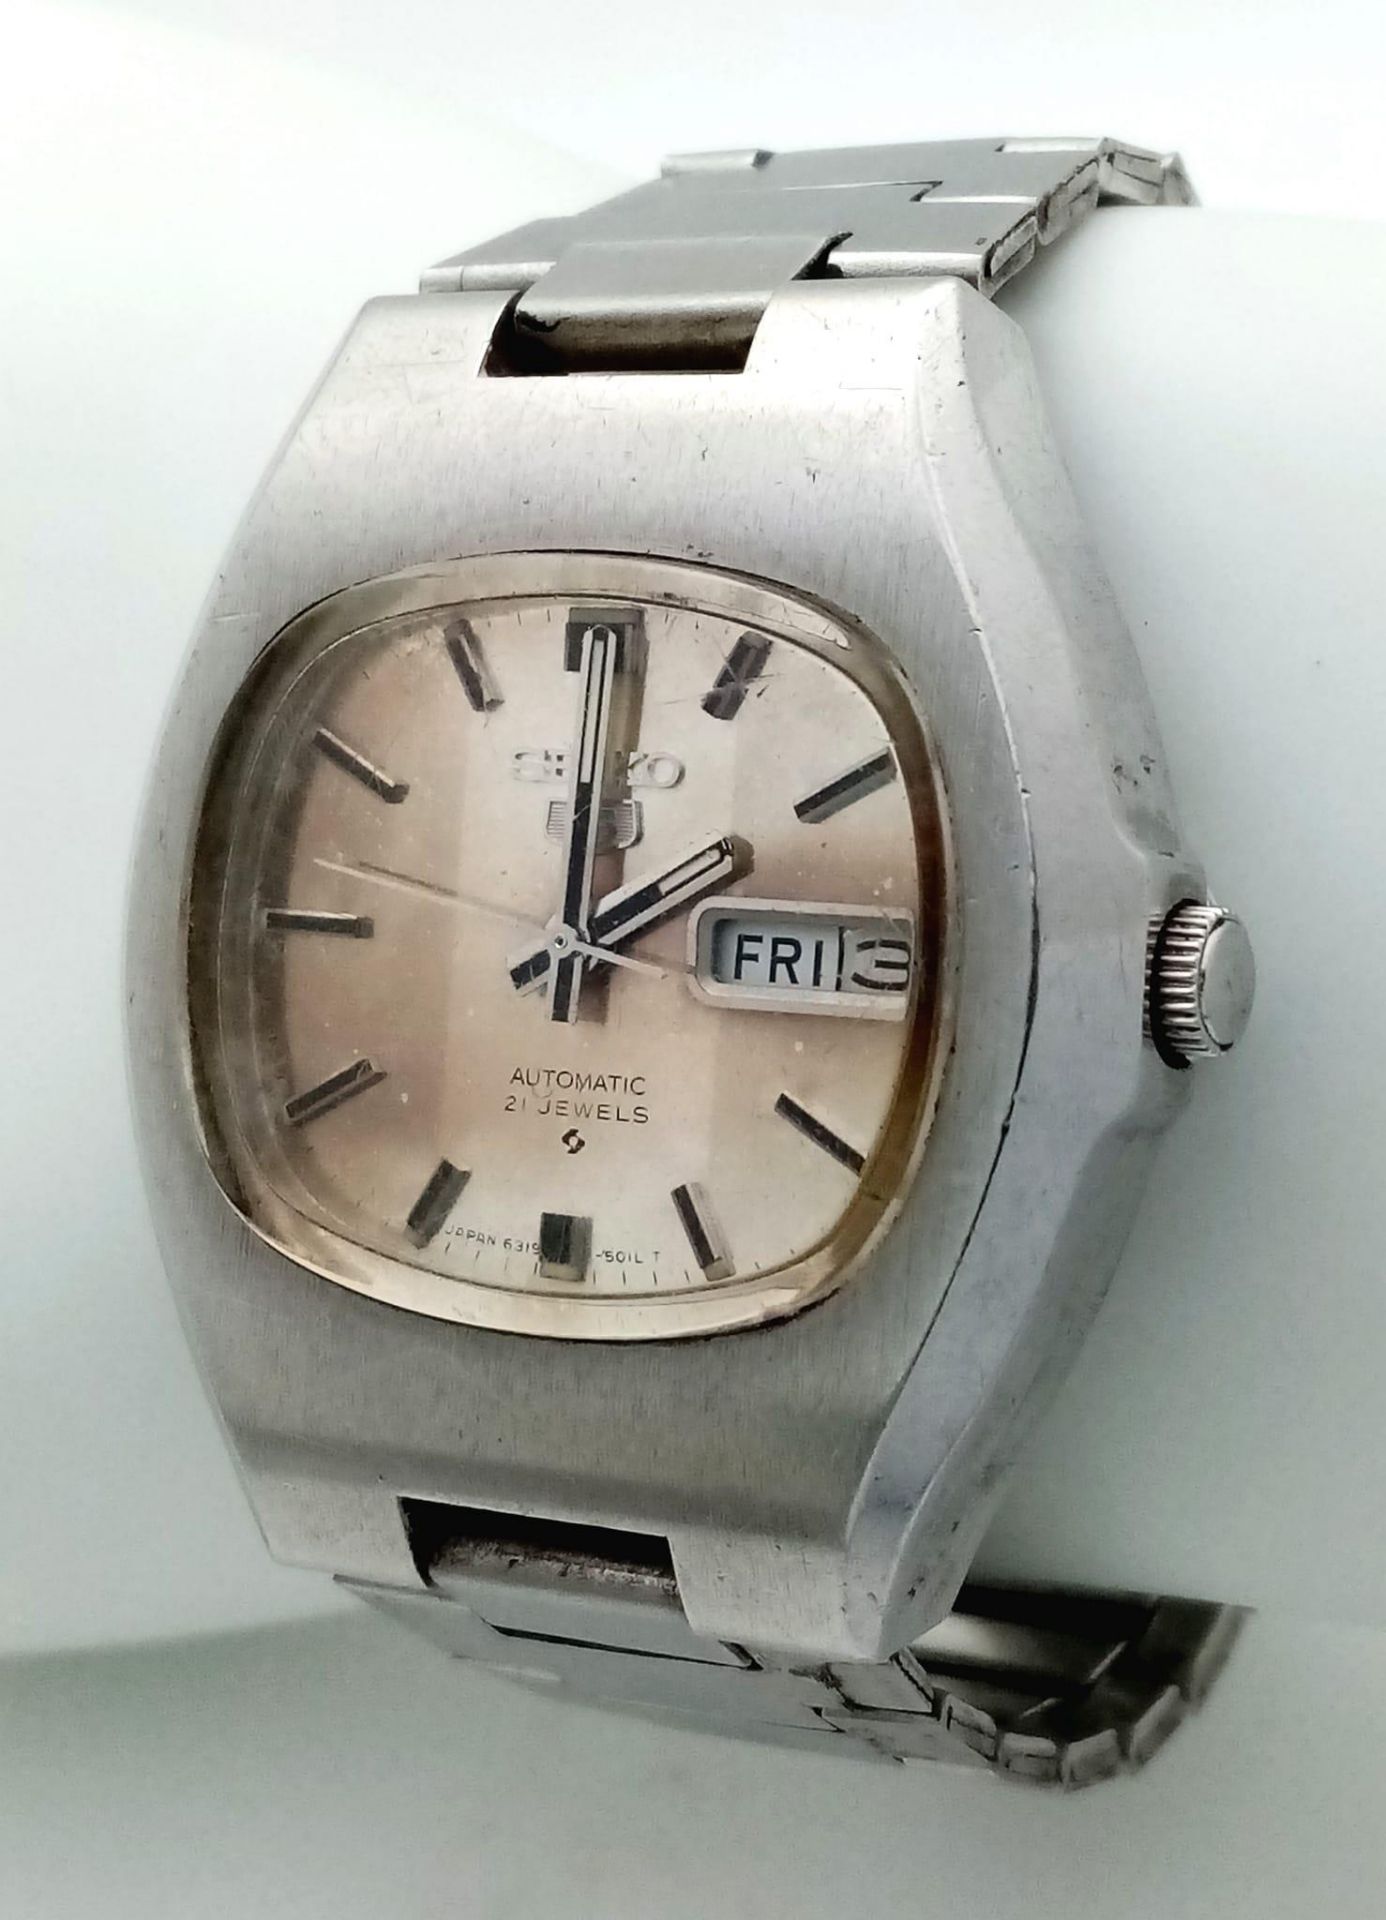 A Vintage Seiko 5 Automatic Gents Watch. A stainless steel bracelet and case - 37mm. Two tone dial